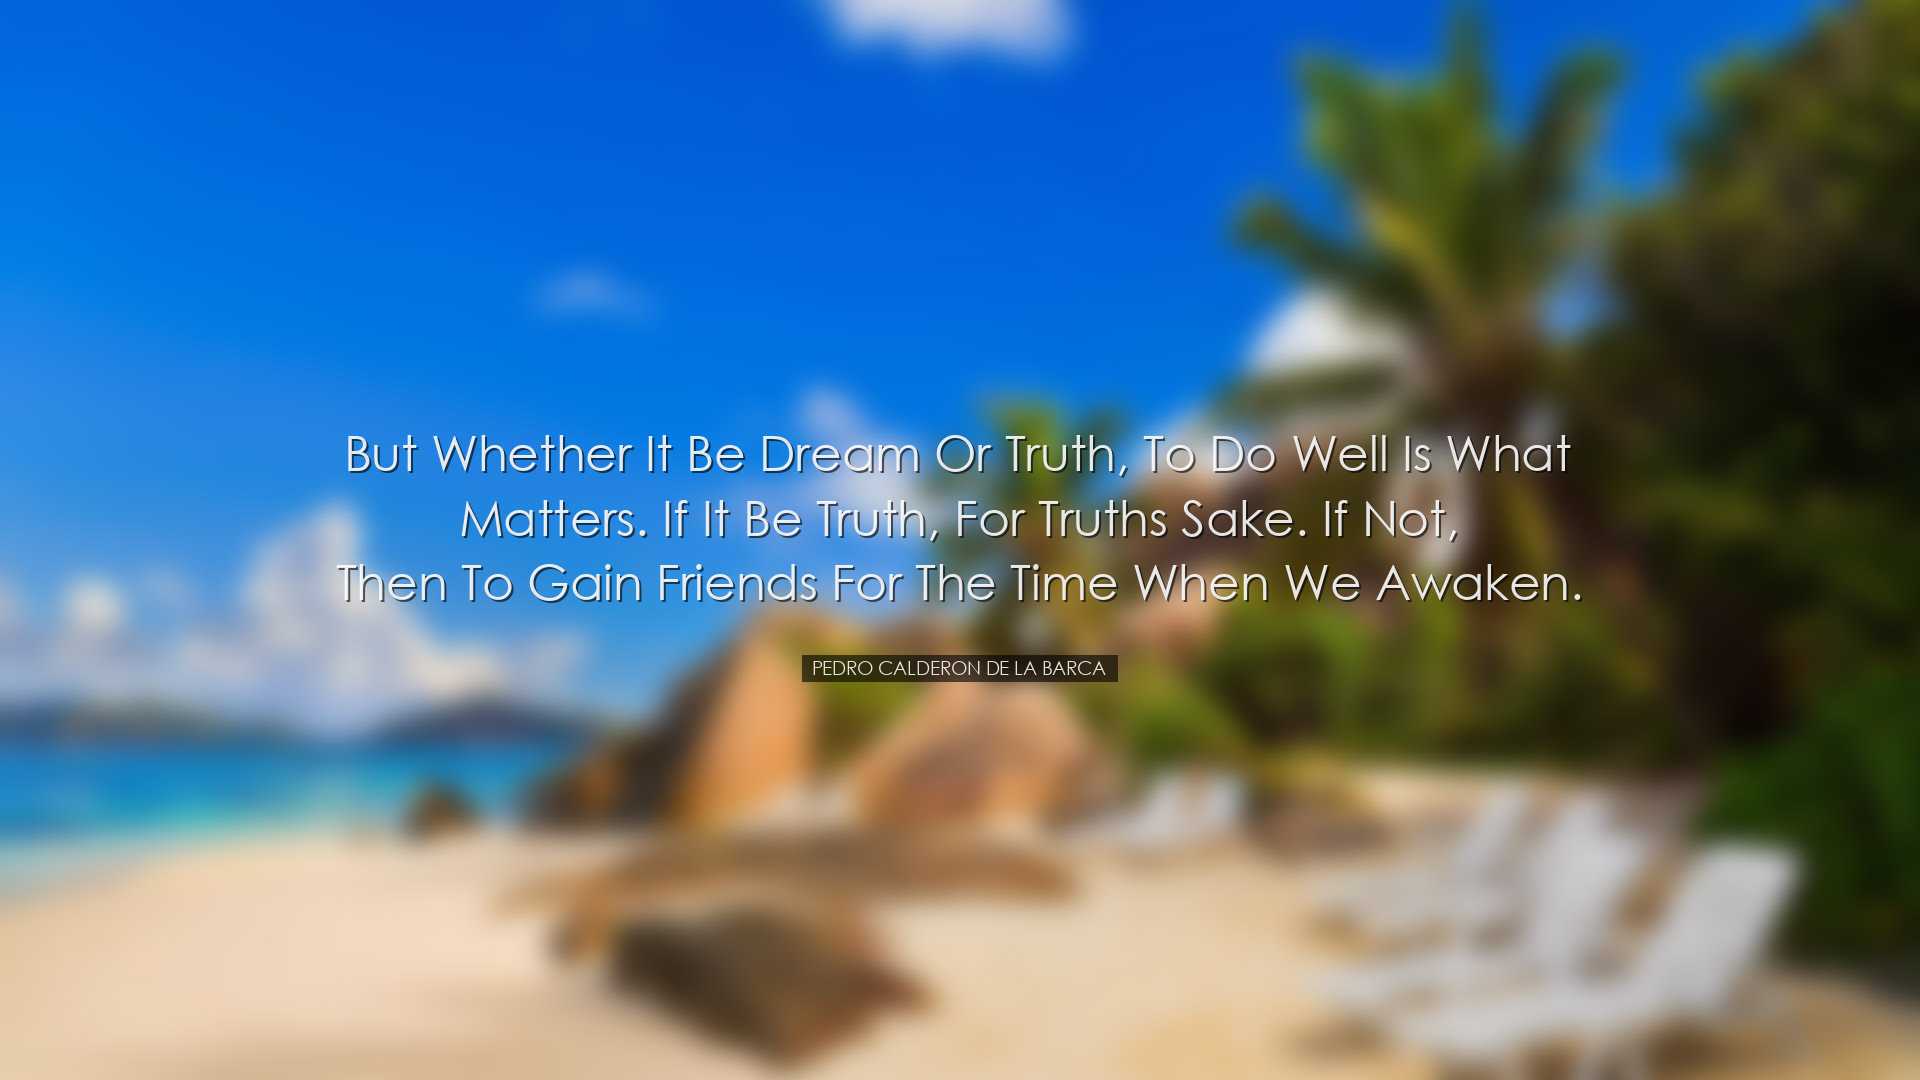 But whether it be dream or truth, to do well is what matters. If i